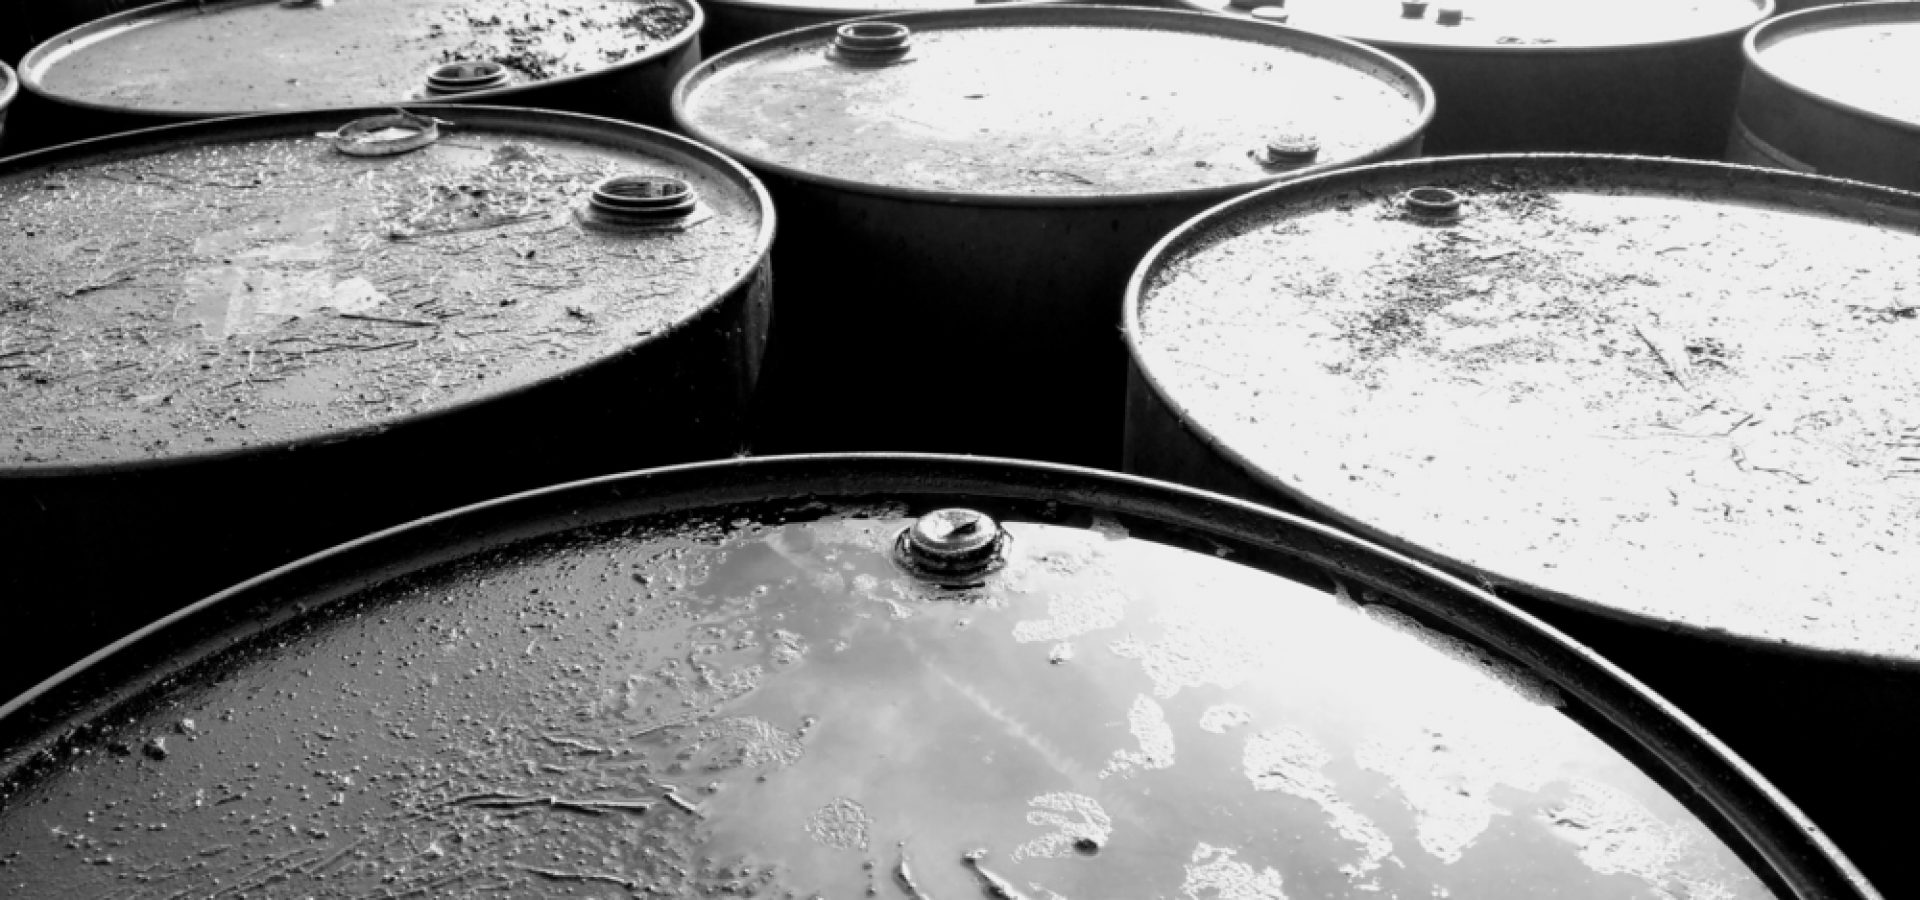 Wibest – Oil and petroleum: Crude oil containers.